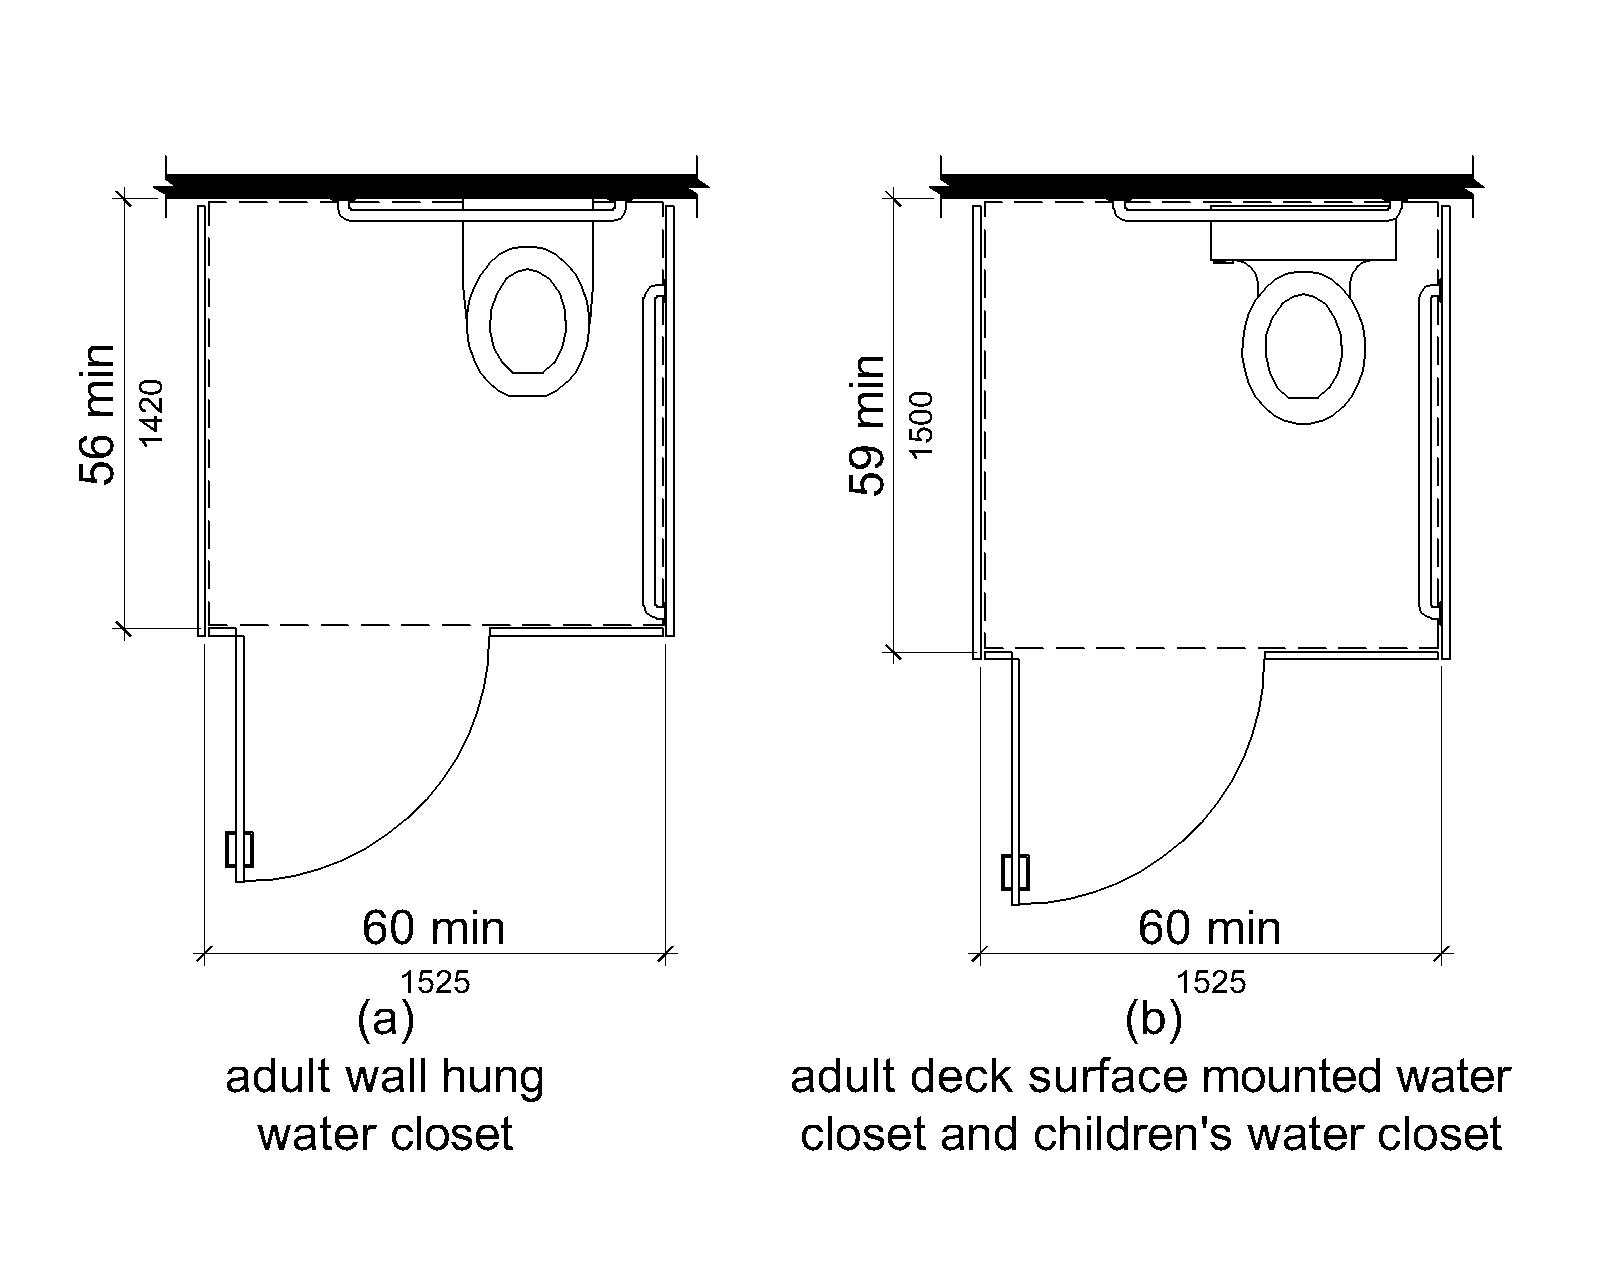 Figure (a) is a plan view of an adult wall hung water closet. The compartment is shown to be 60 inches (1525 mm) wide minimum and 56 inches (1420 mm) deep minimum. Figure (b) is a plan view of an adult deck surface mounted and a children’s water closet. The compartment is shown to be 60 inches (1525 mm) wide minimum and 59 inches (1500 mm) deep minimum.